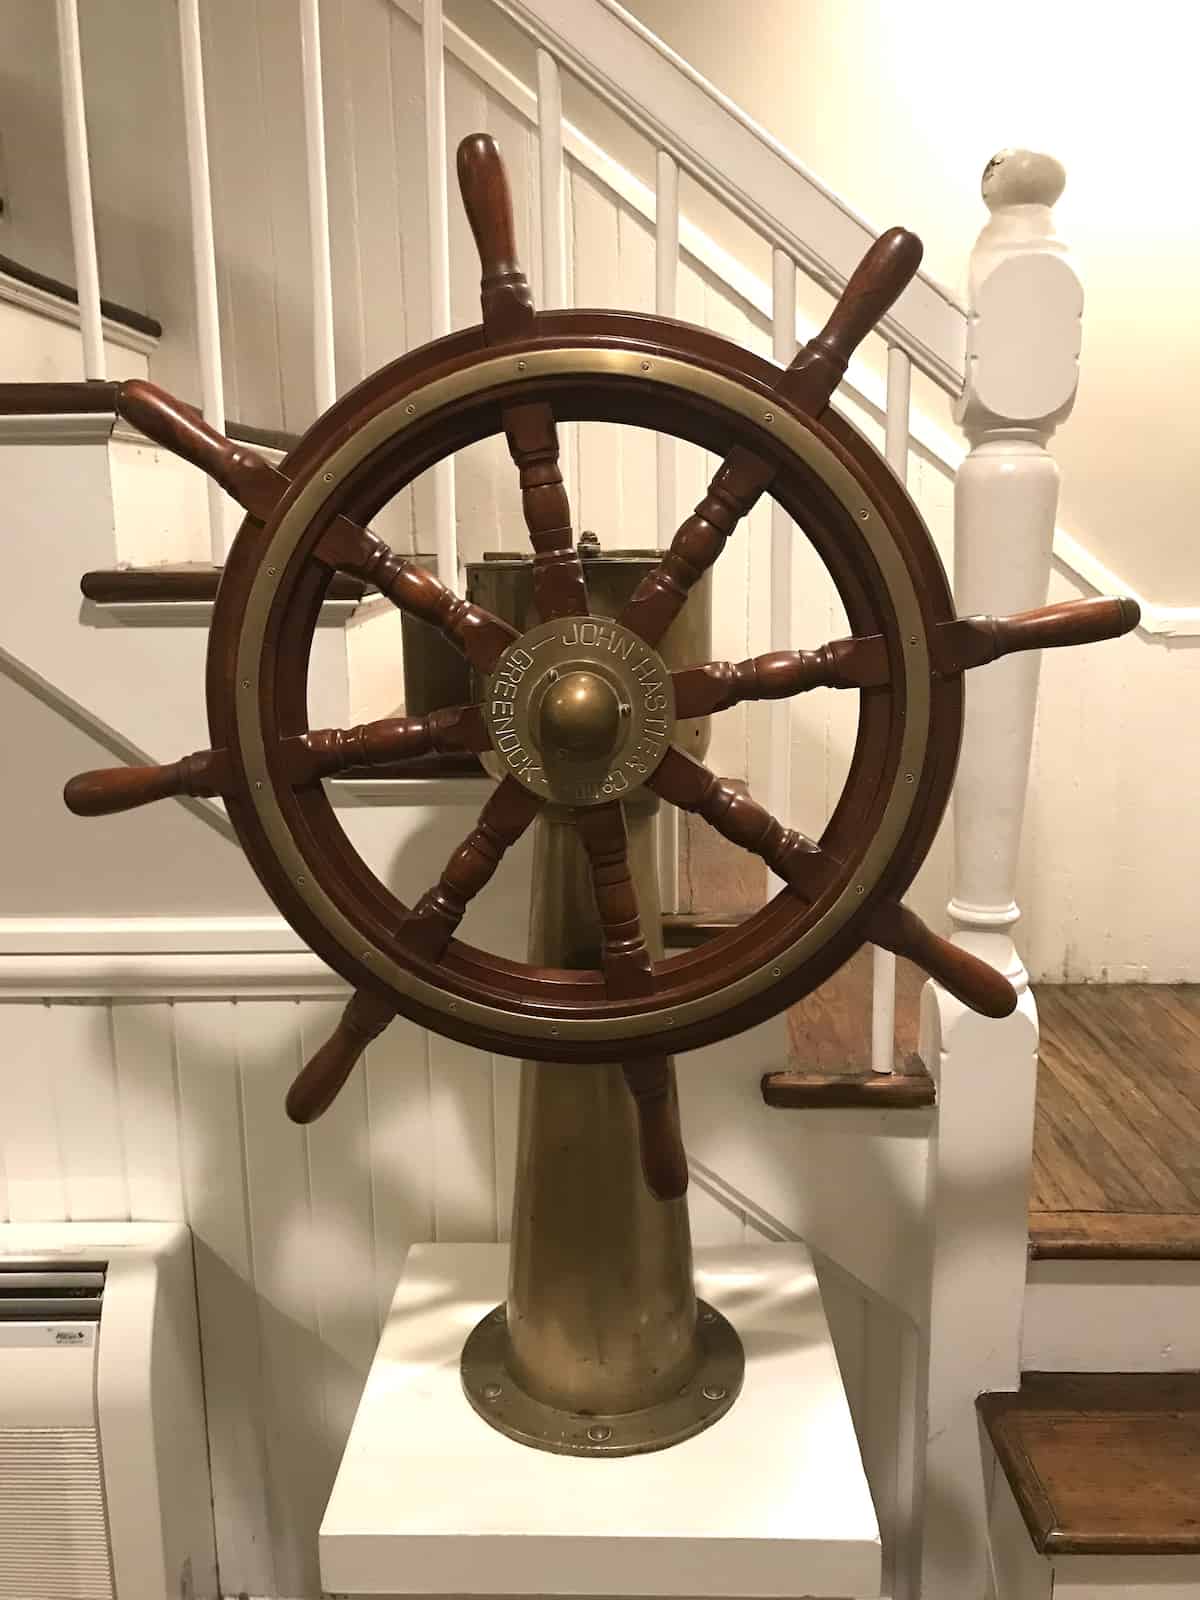 Antique helm or steering wheel from ship.